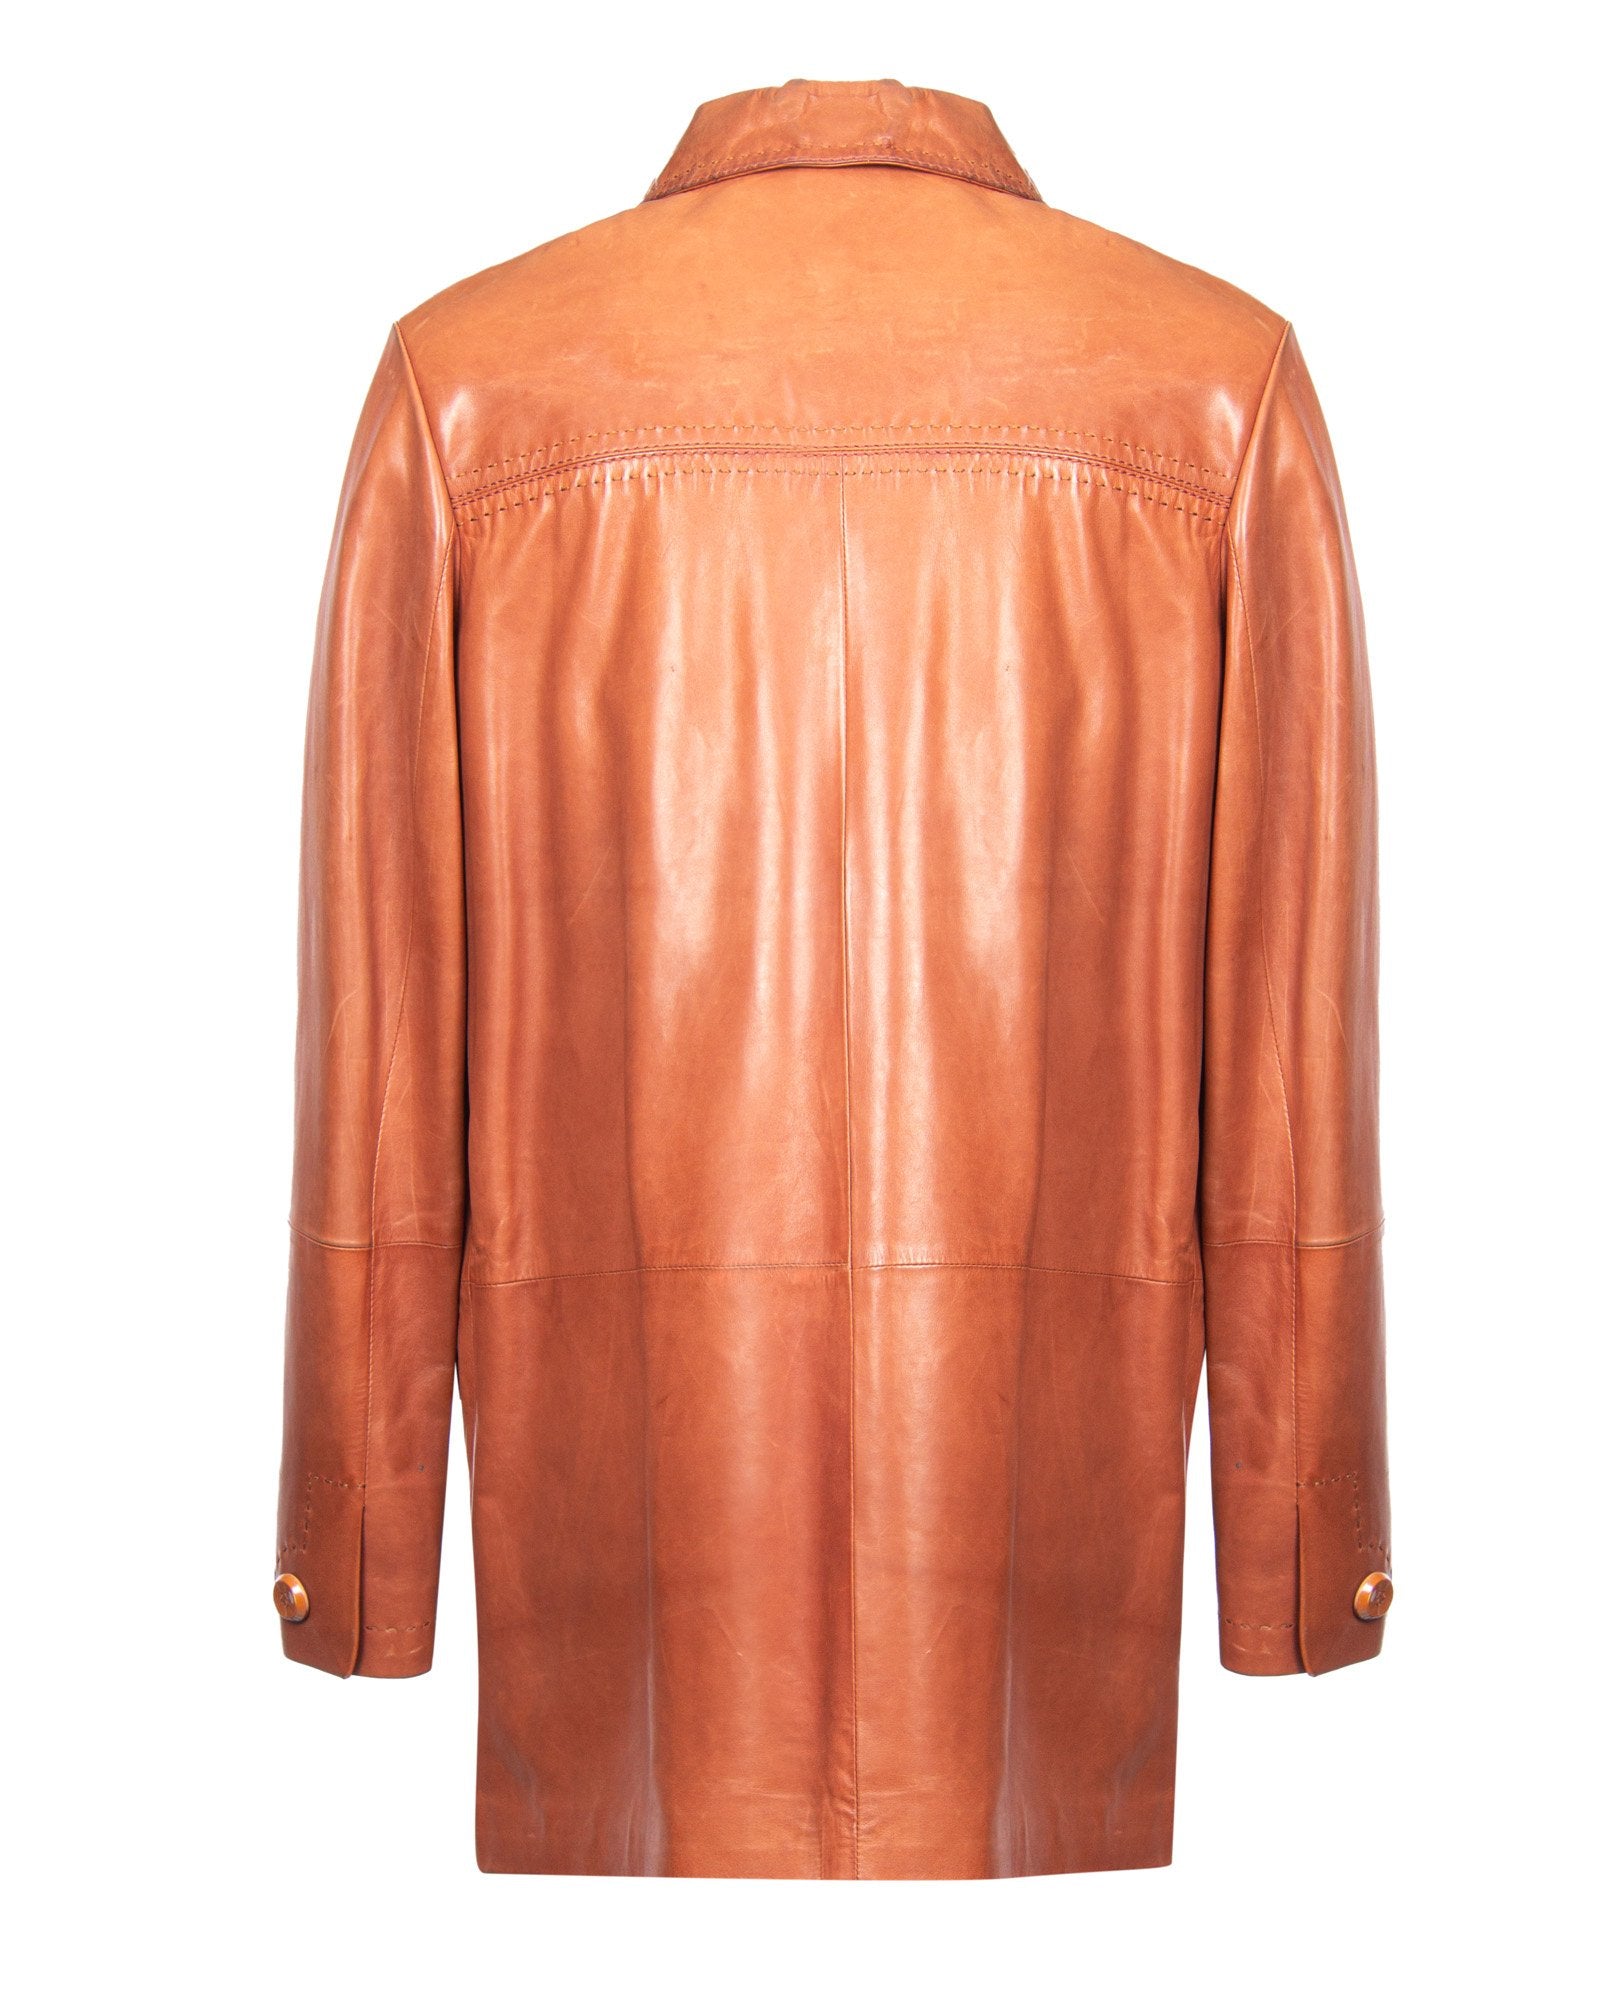 Brown Long Leather Jacket